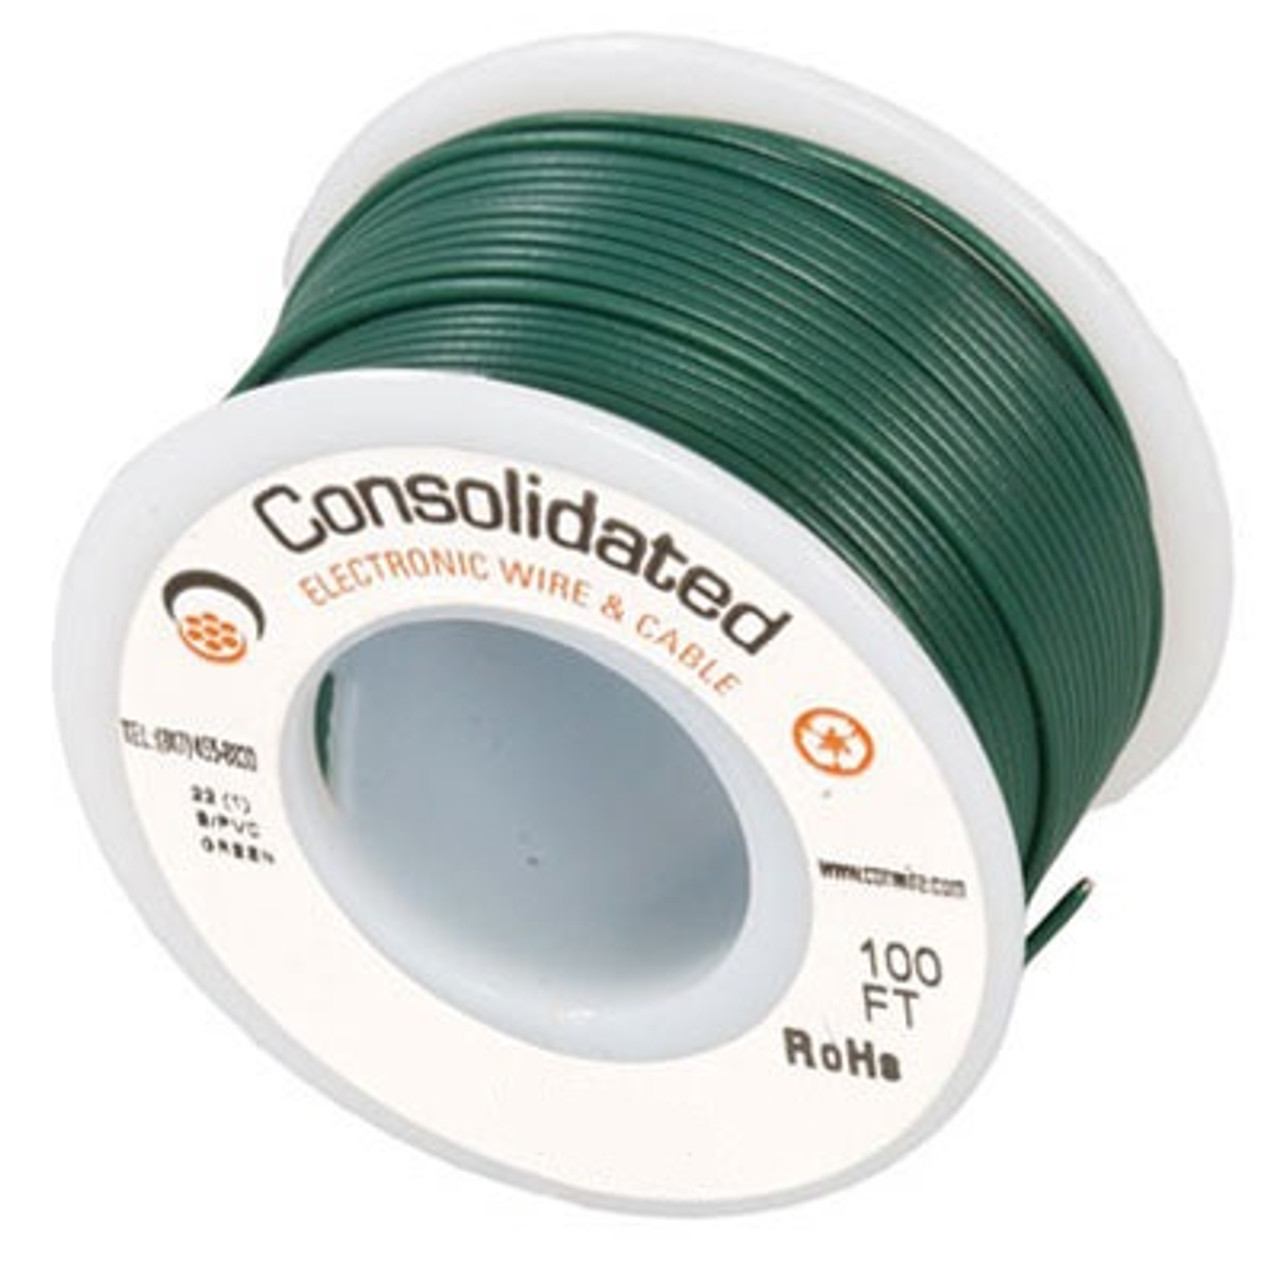 https://cdn11.bigcommerce.com/s-nnahwwwhci/images/stencil/1280x1280/products/15887/18328/green-25-foot-22-awg-stranded-hook-up-wire-41__73071.1663599356.jpg?c=1